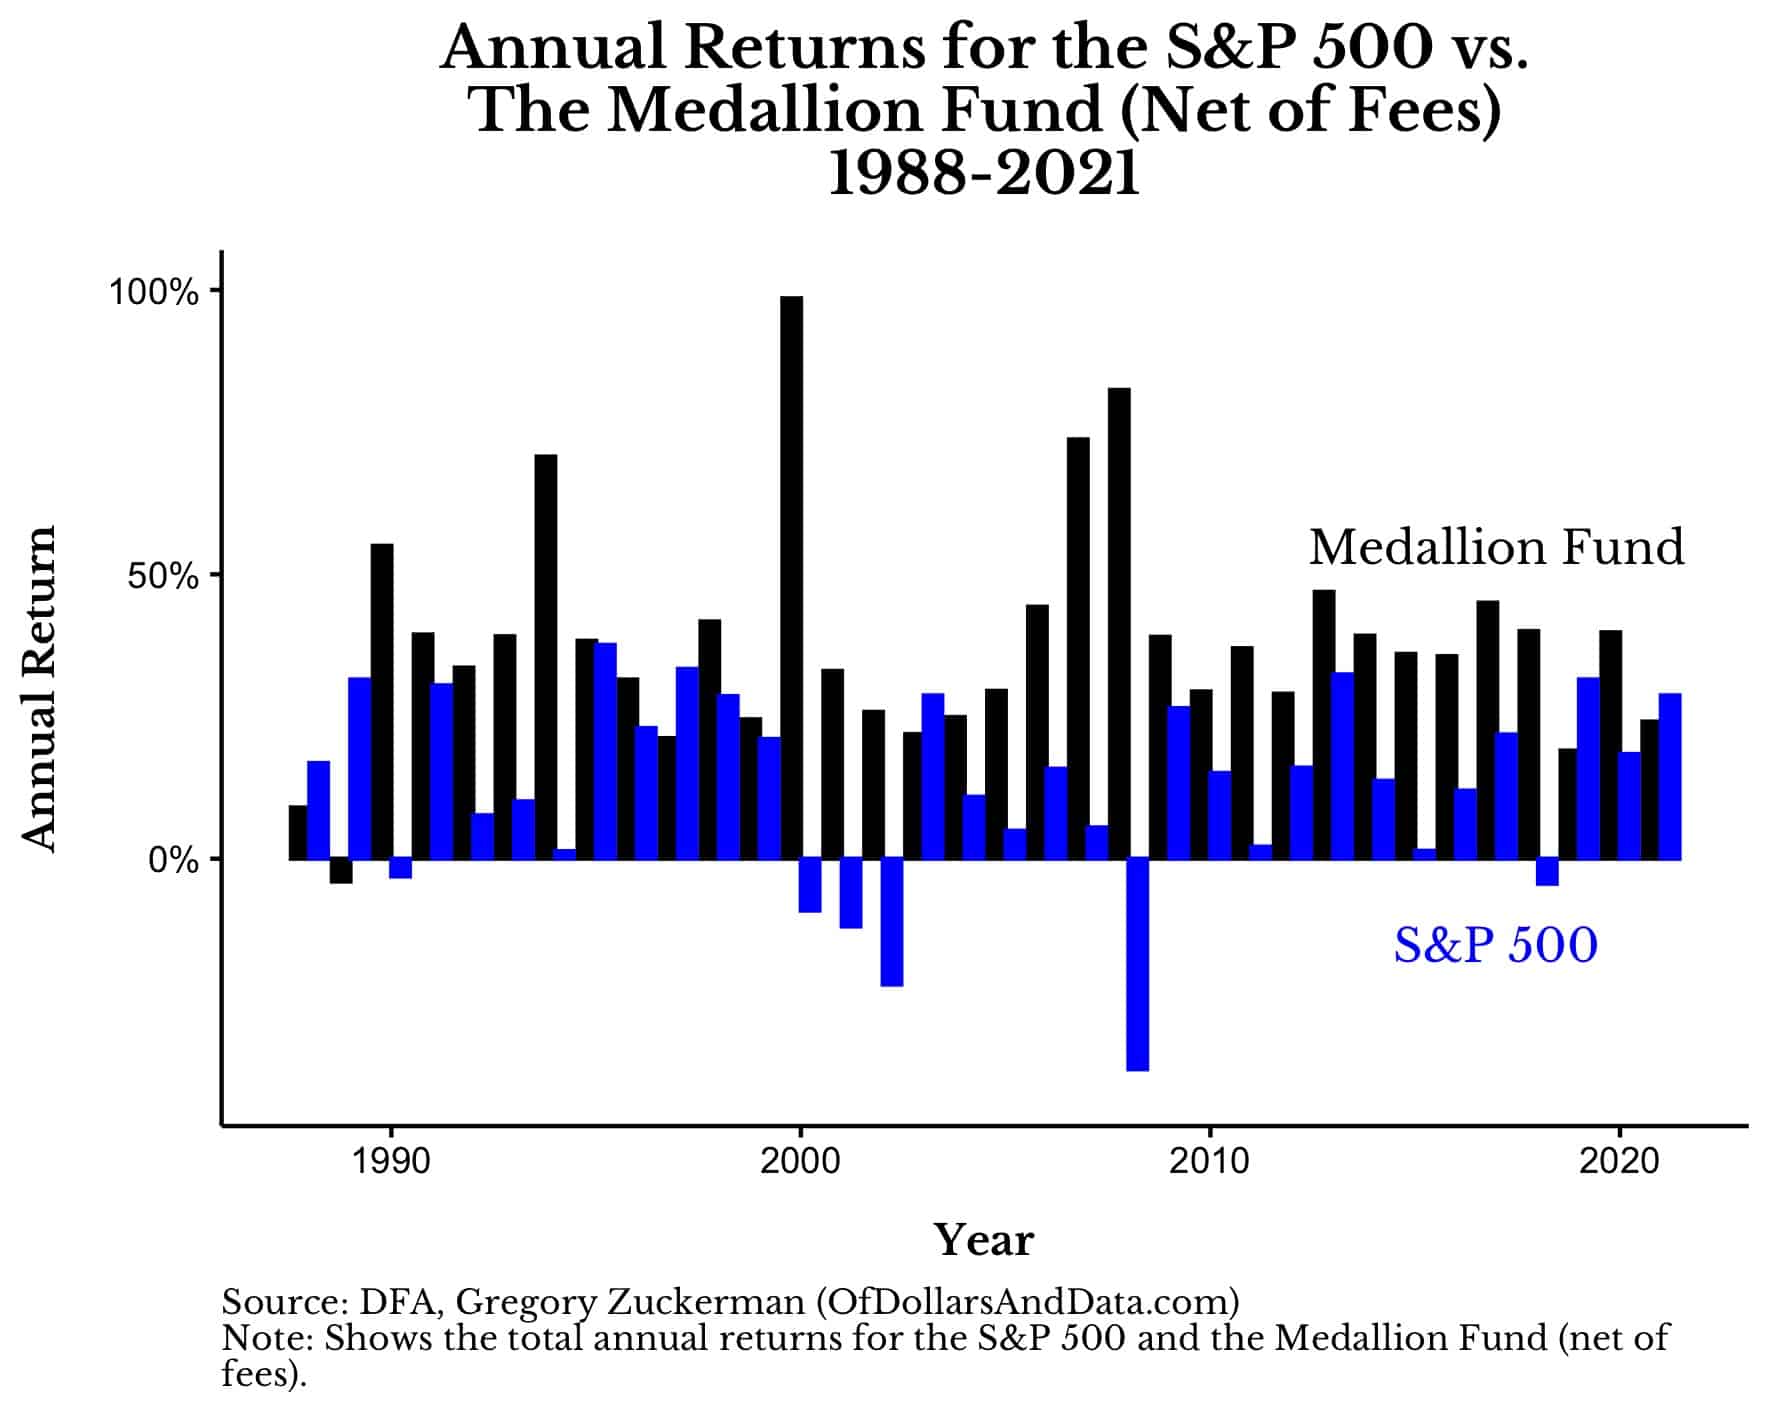 Annual returns of the S&P 500 vs. the Medallion Fund for 1988-2021.